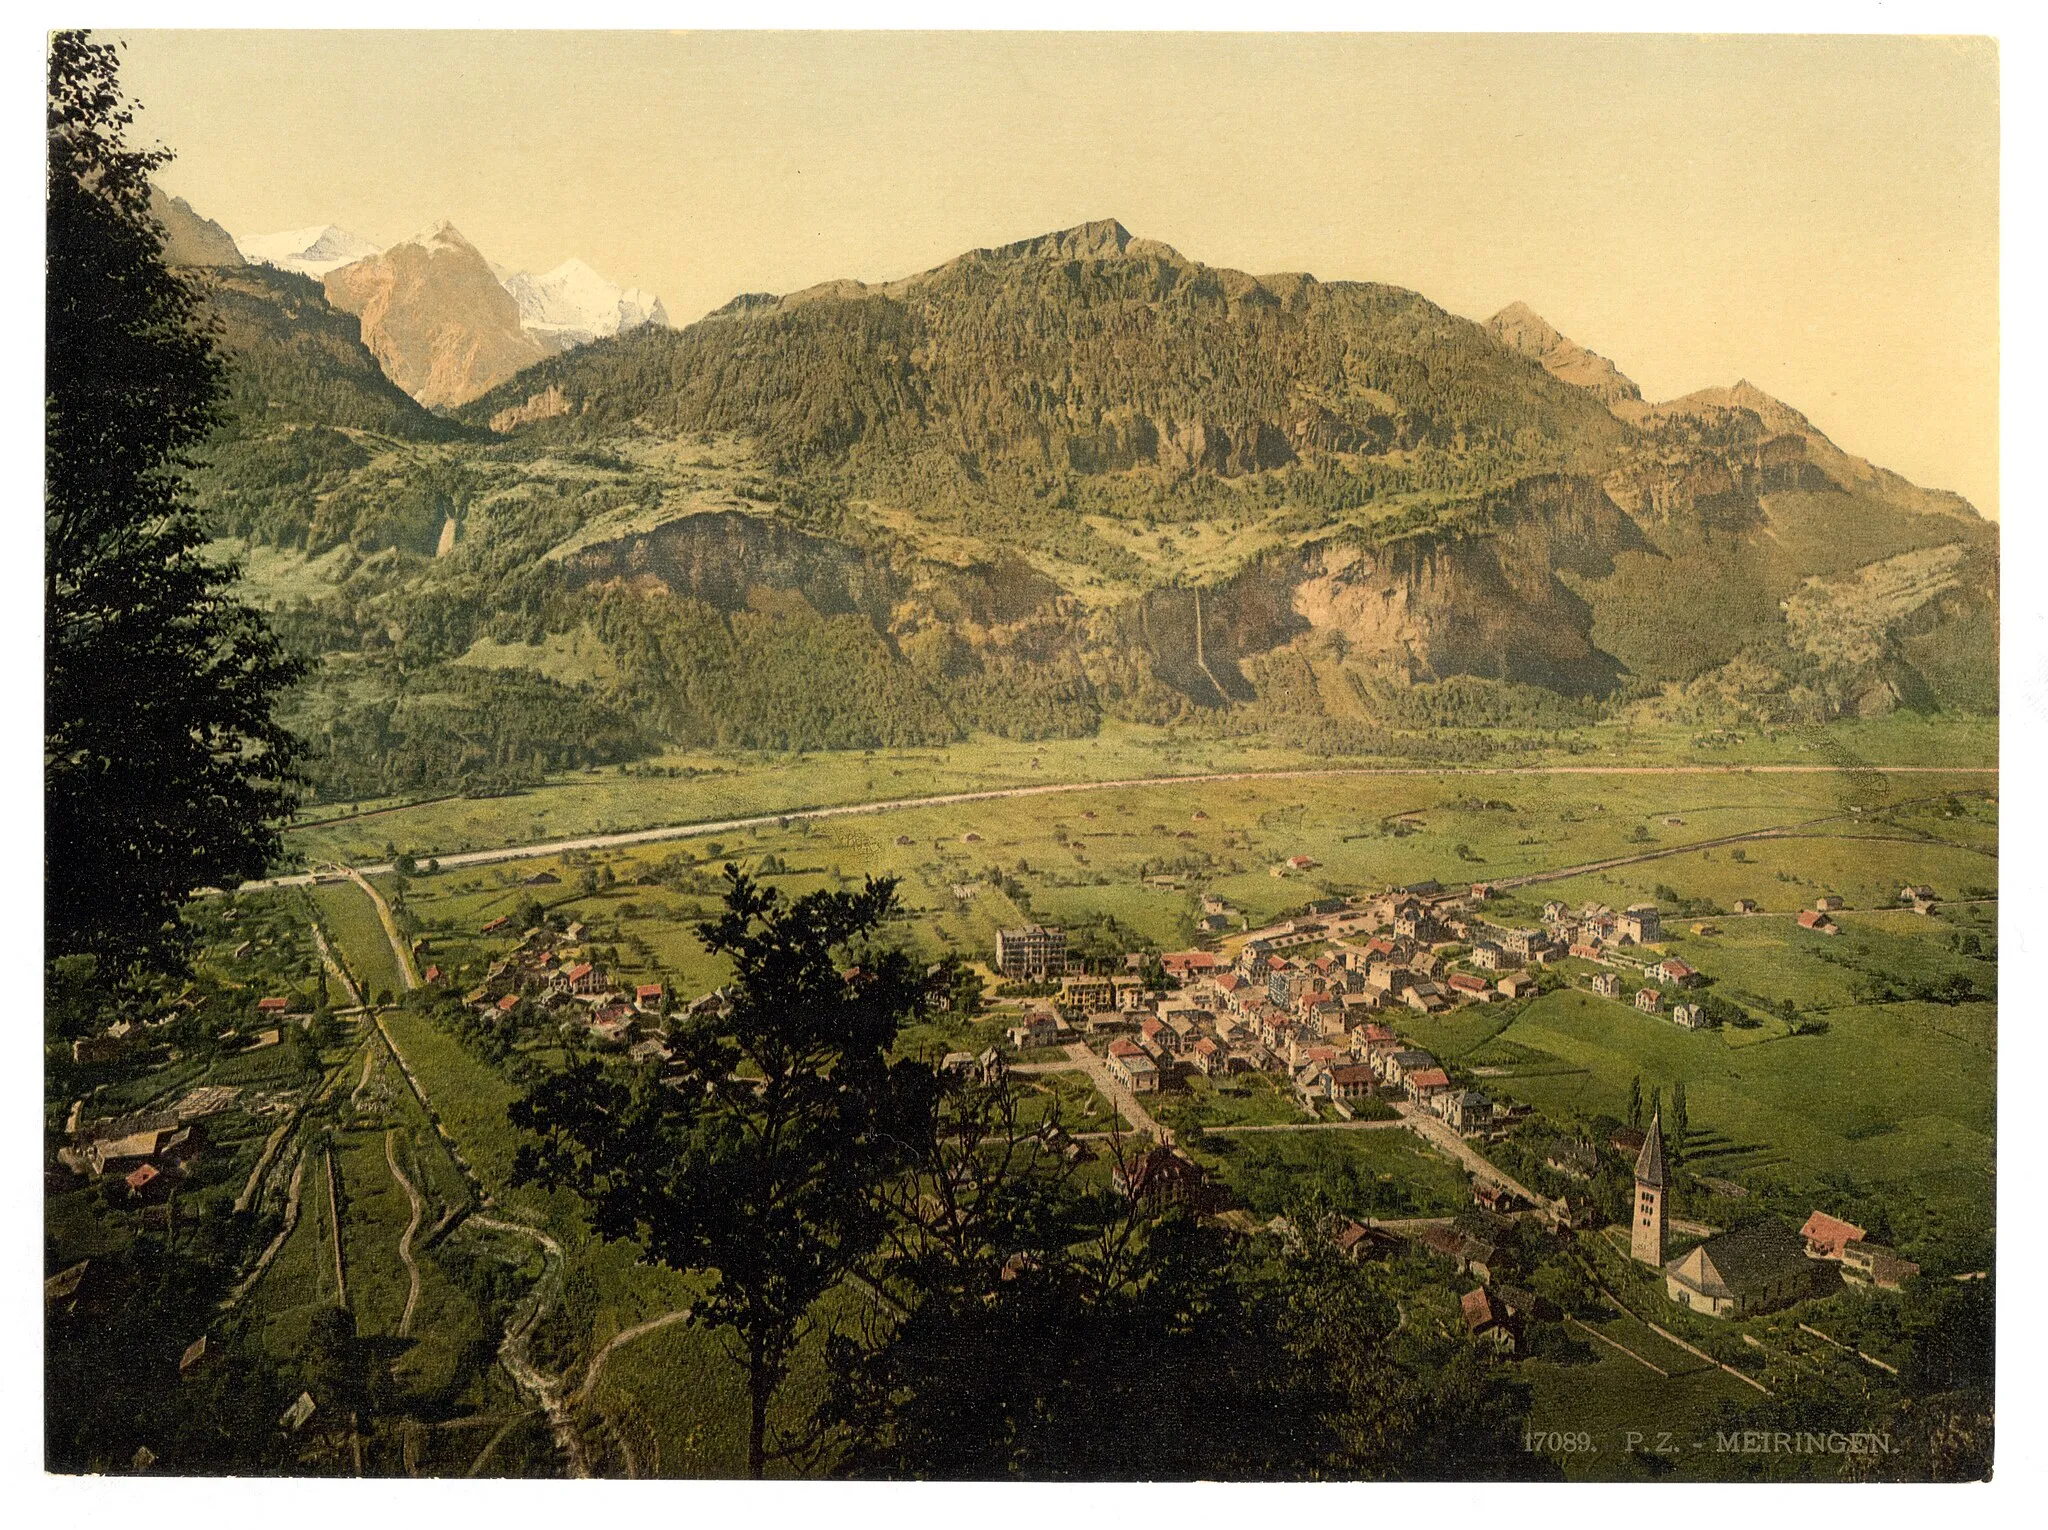 Photo showing: Forms part of: Views of Switzerland in the Photochrom print collection.; Title devised by Library staff.; Print no. "17089".